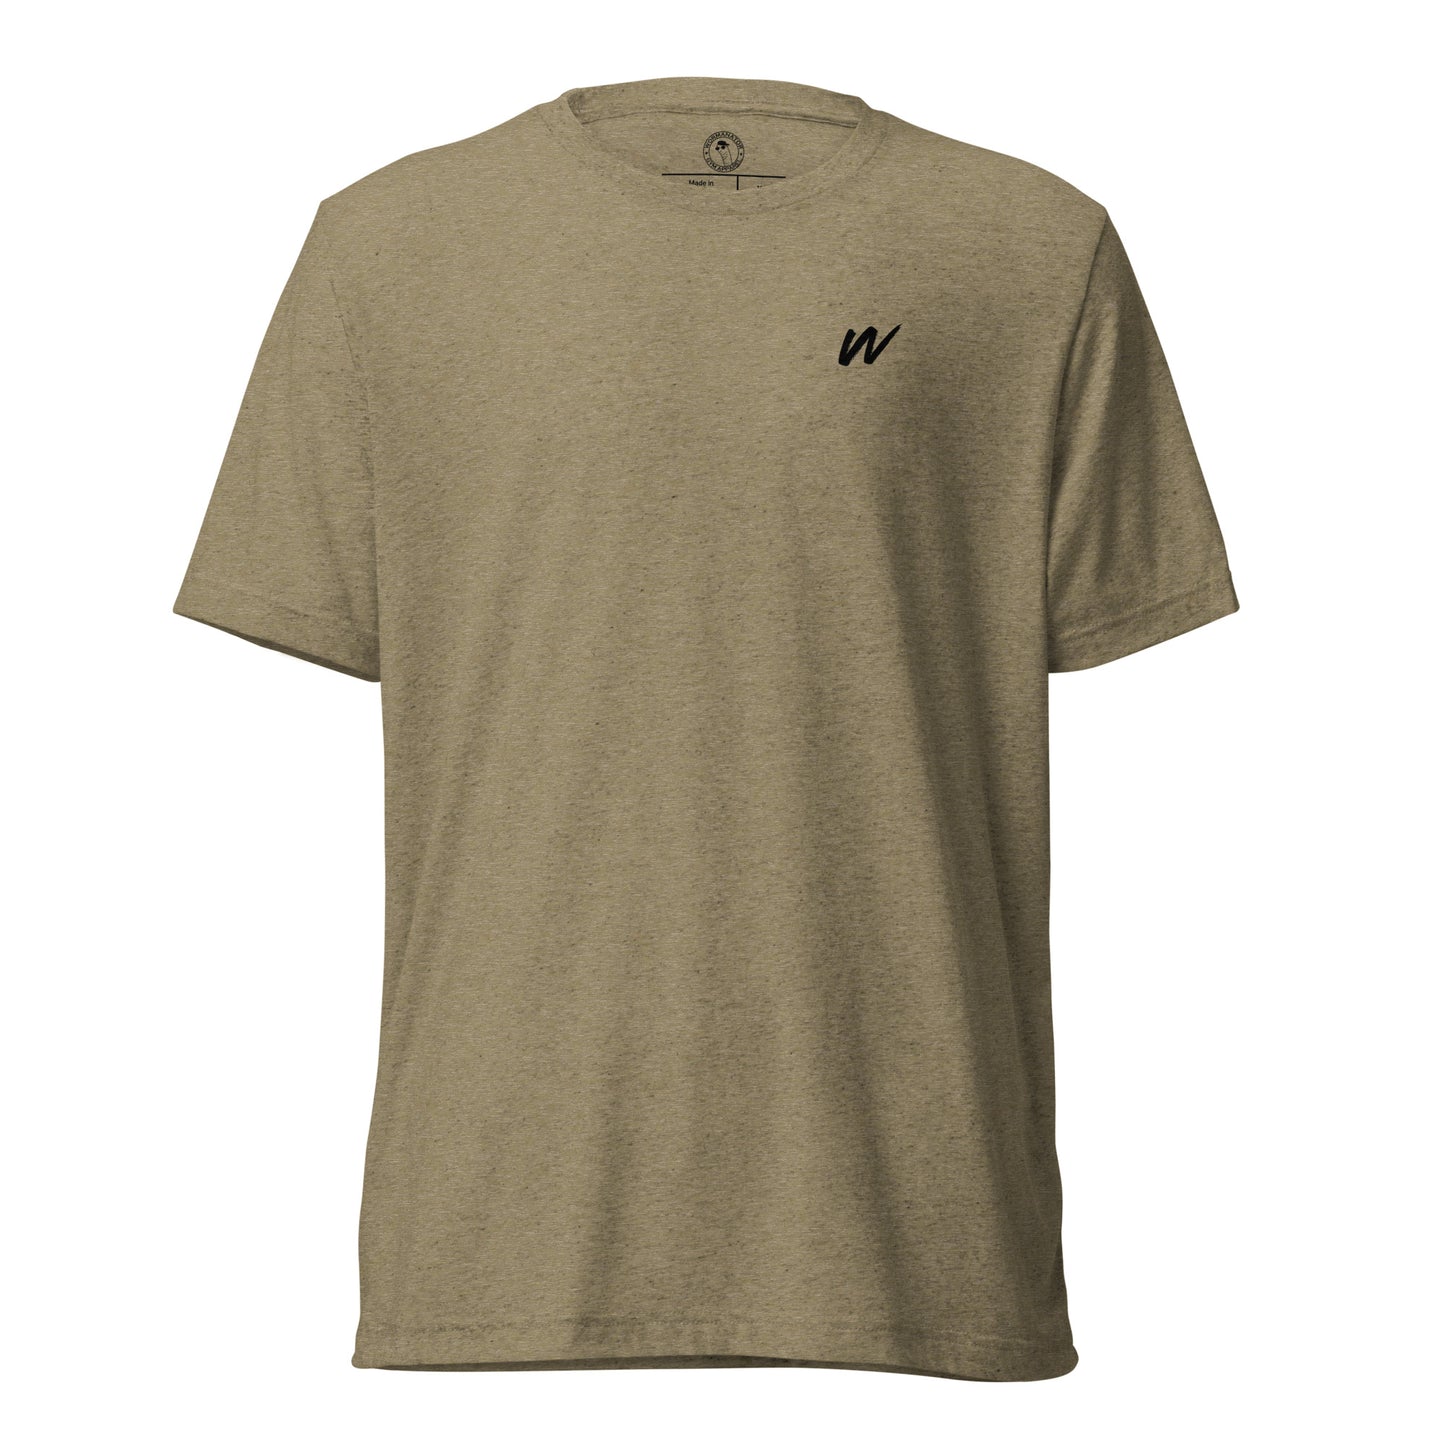 Win the Day T-Shirt in Olive Triblend